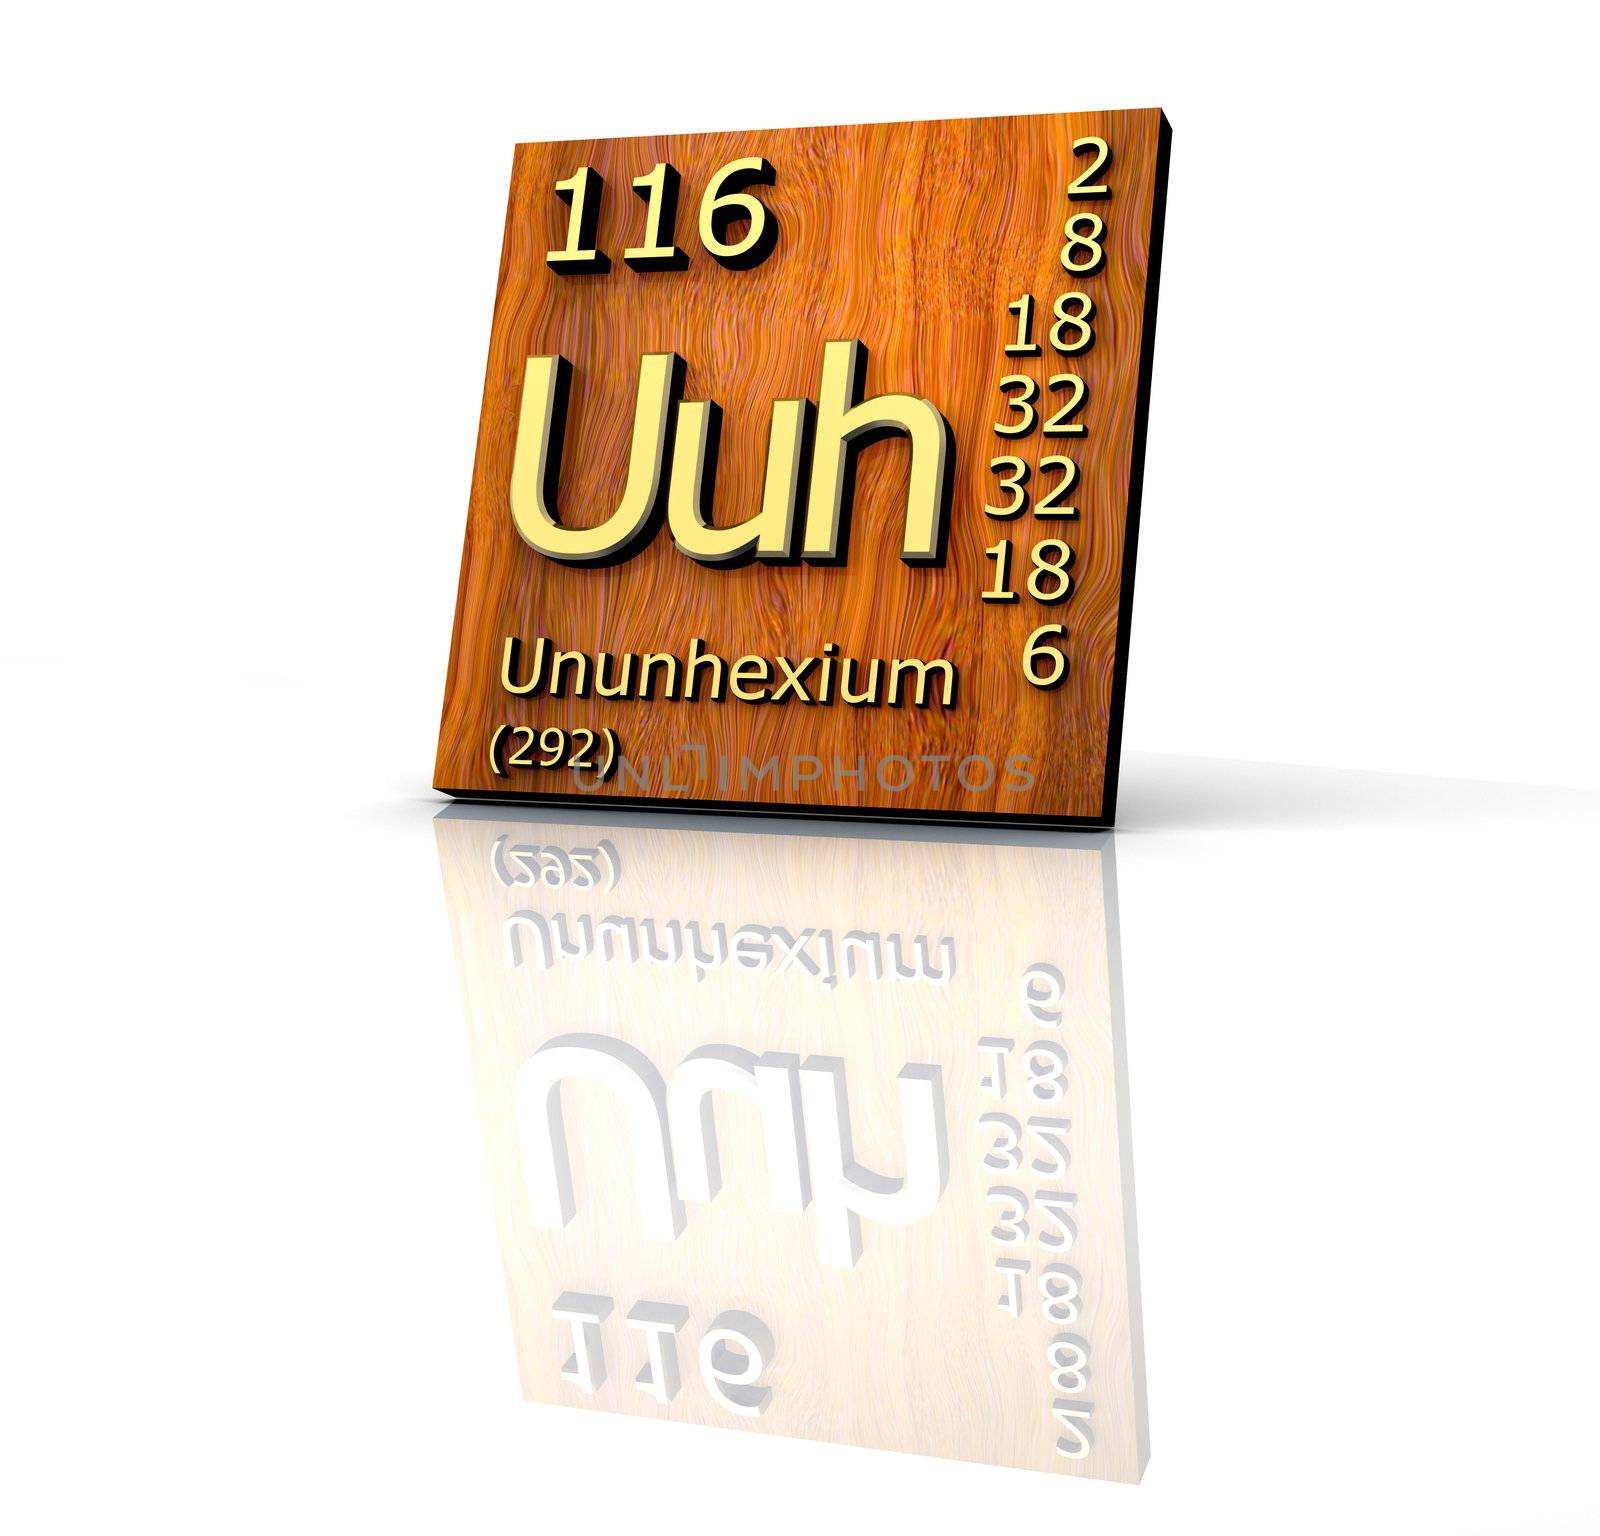 Ununhexium Periodic Table of Elements - wood board - 3d made